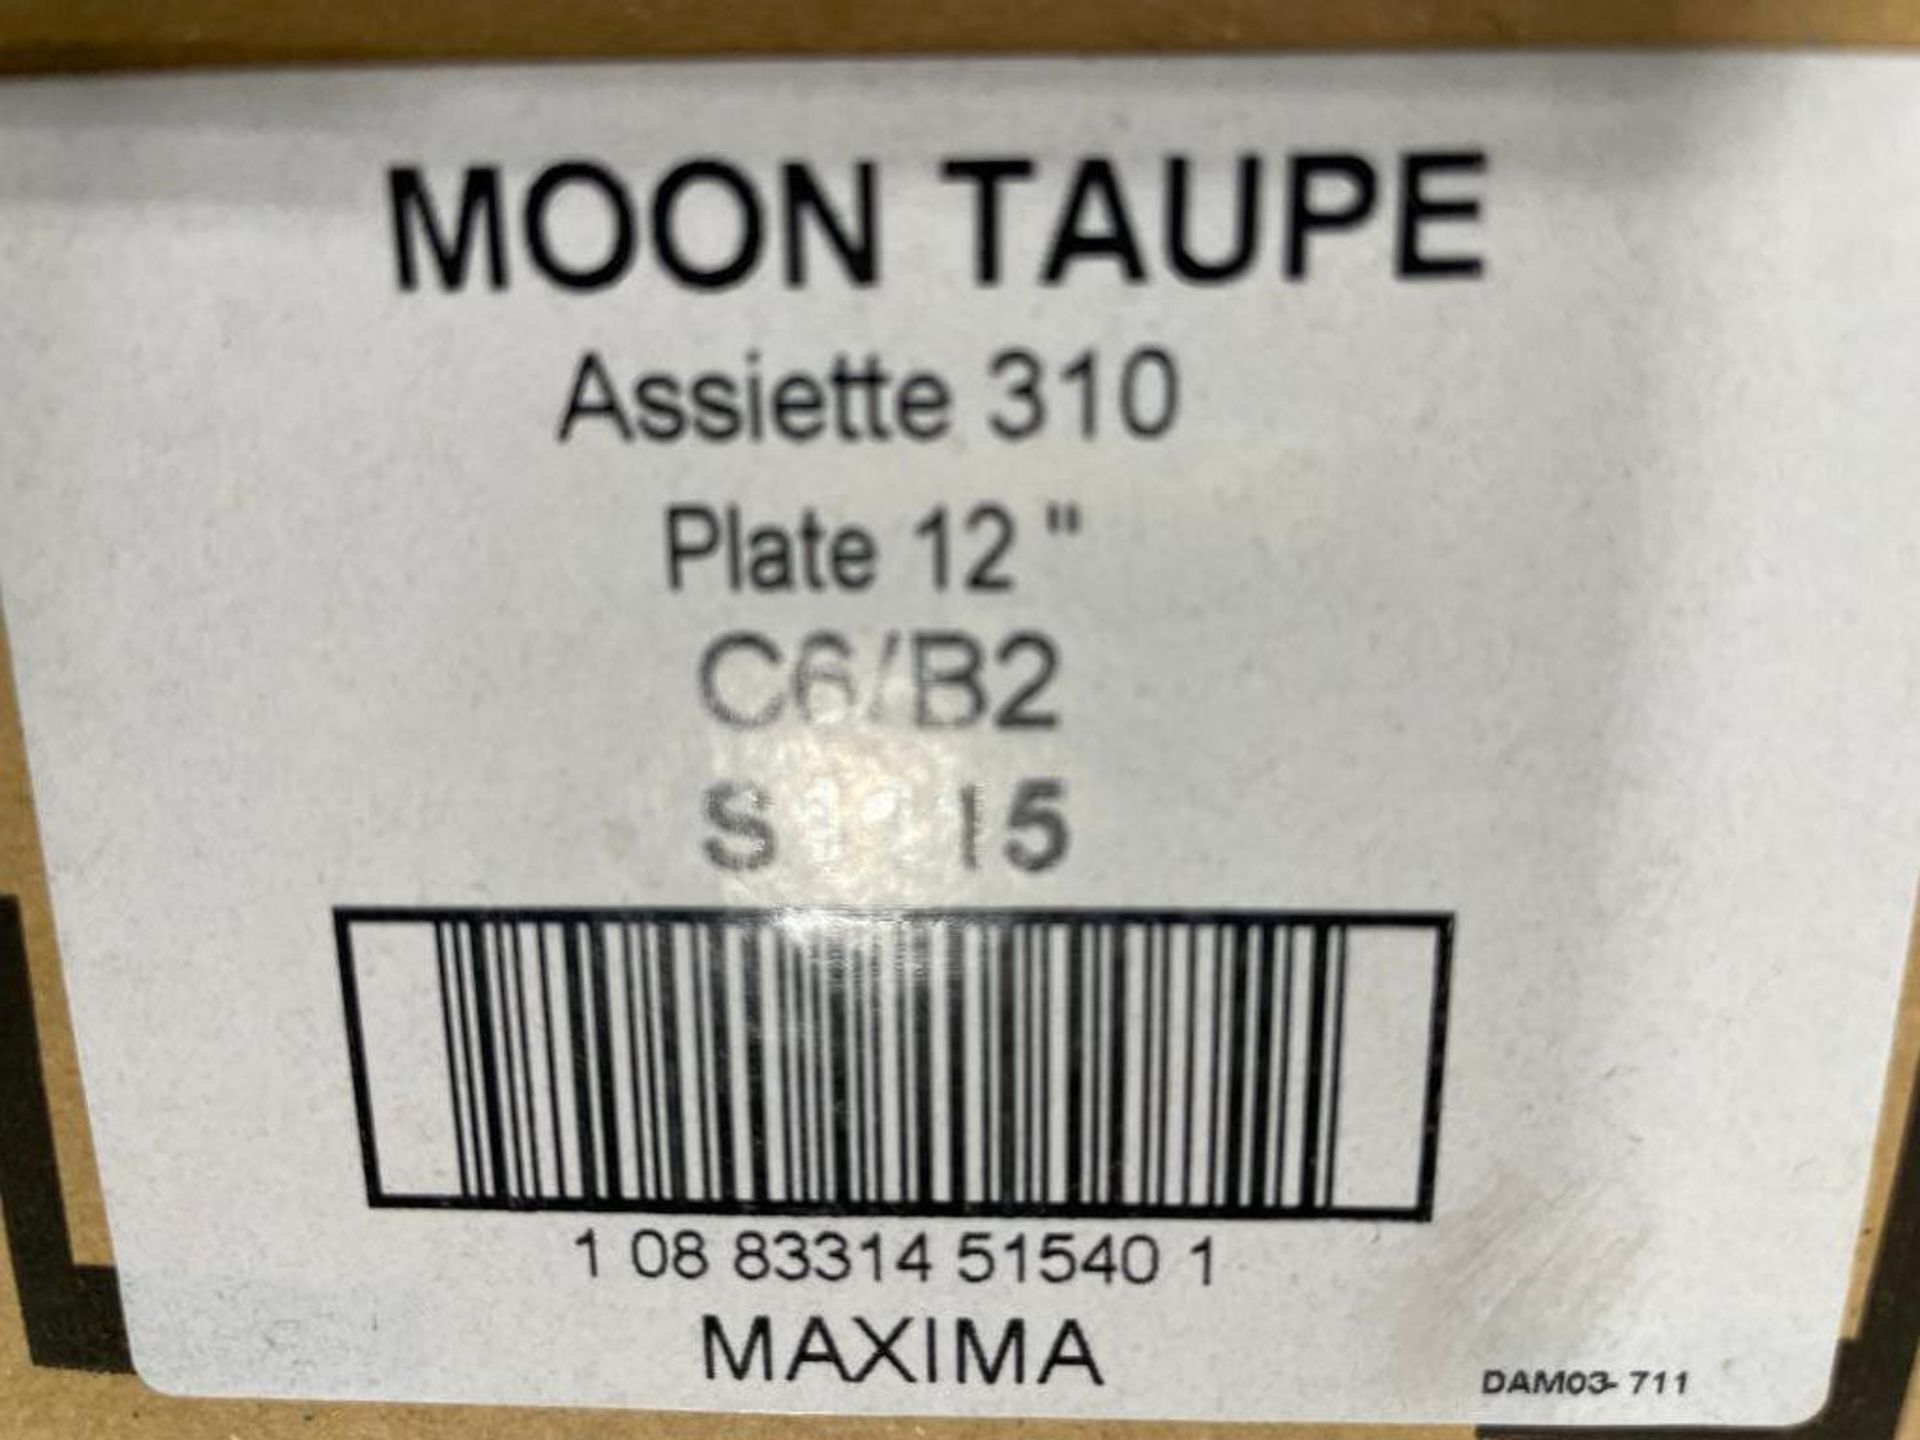 2 CASES OF 12" MOON TAUPE PRESENTATION PLATE - 12/CASE, ARCOROC - NEW - Image 4 of 4